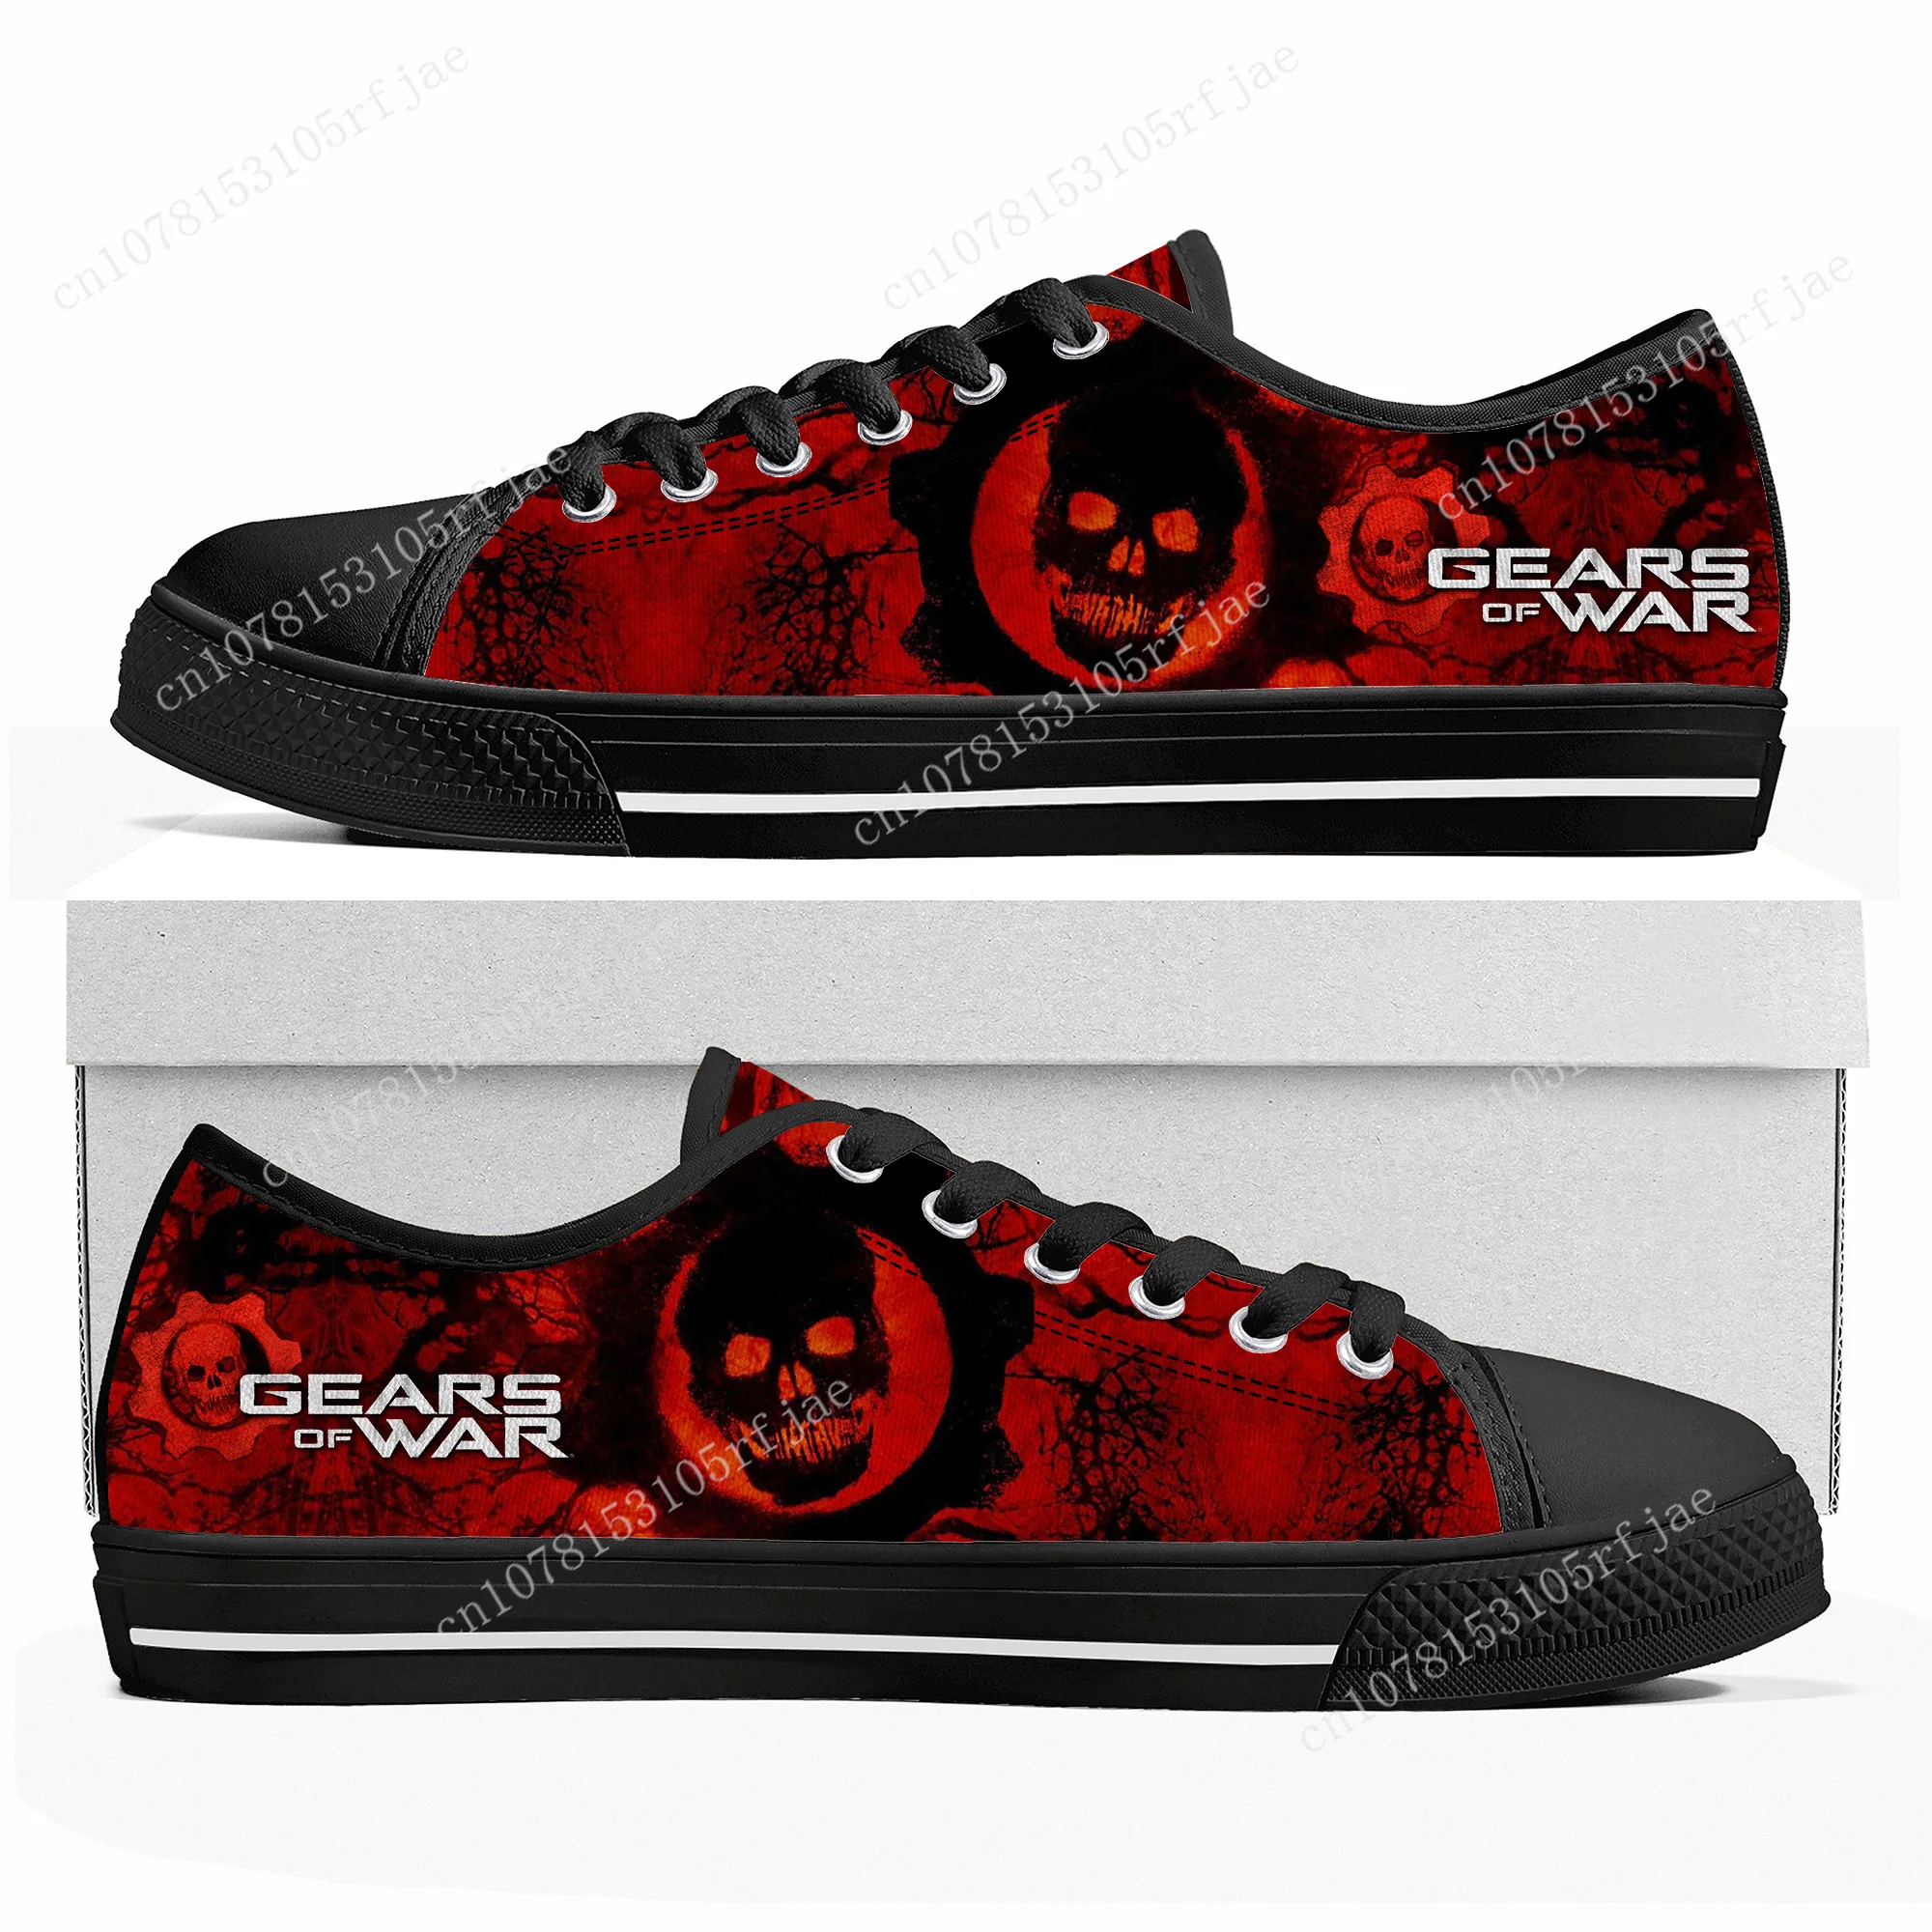 

Gears of War Low Top Sneakers Hot Cartoon Game Womens Mens Teenager High Quality Shoes Casual Fashion Tailor Made Canvas Sneaker